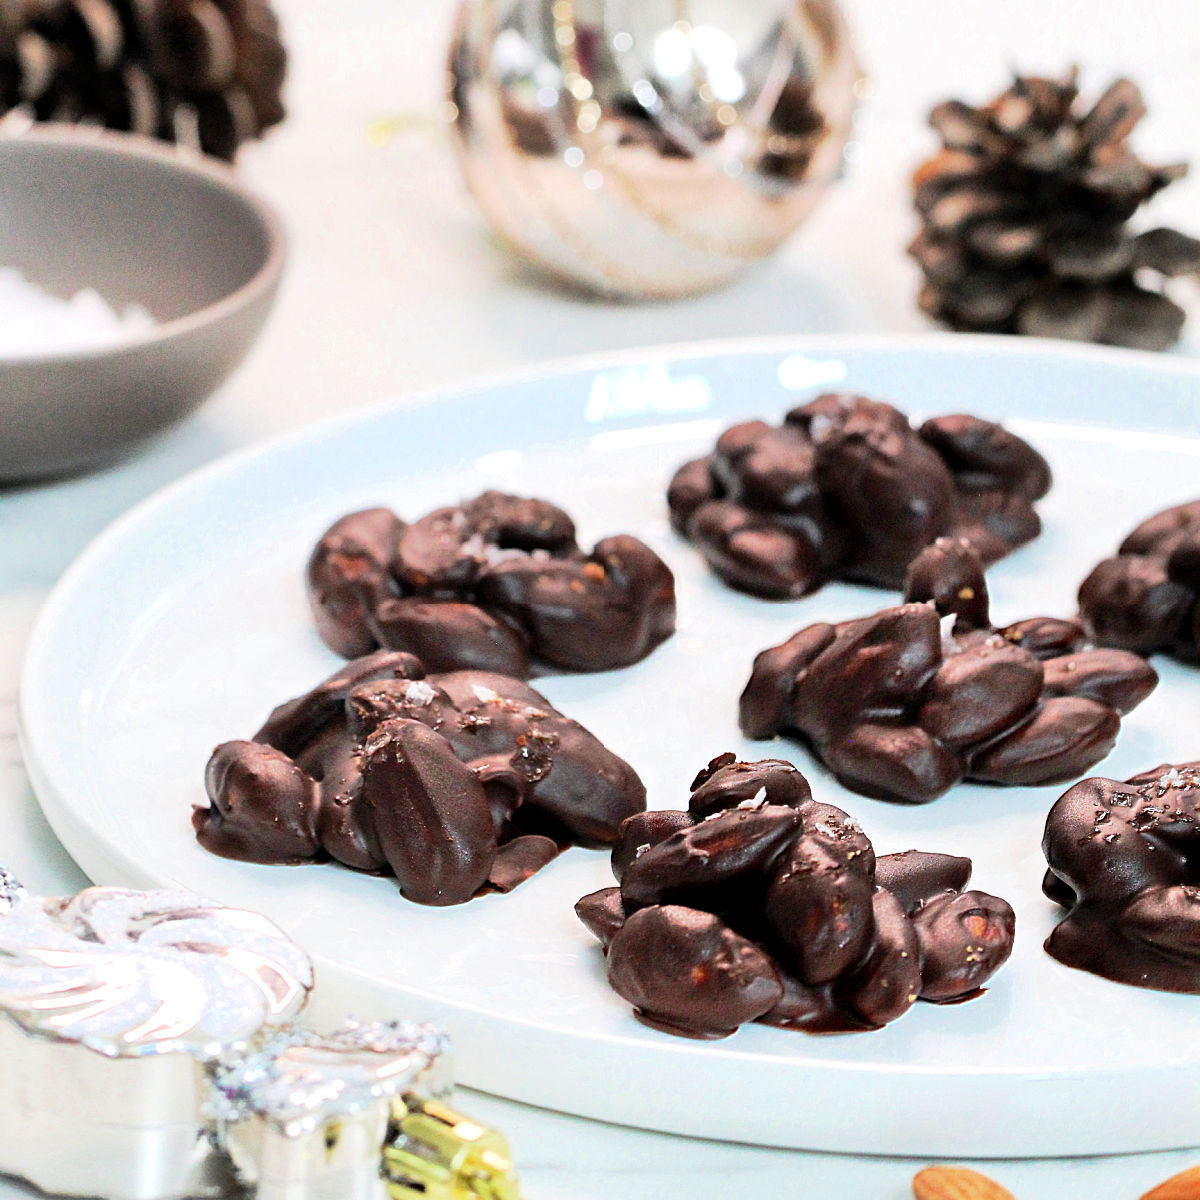 Chocolate almond clusters on a white plate with pinecones and silver ornaments around it.